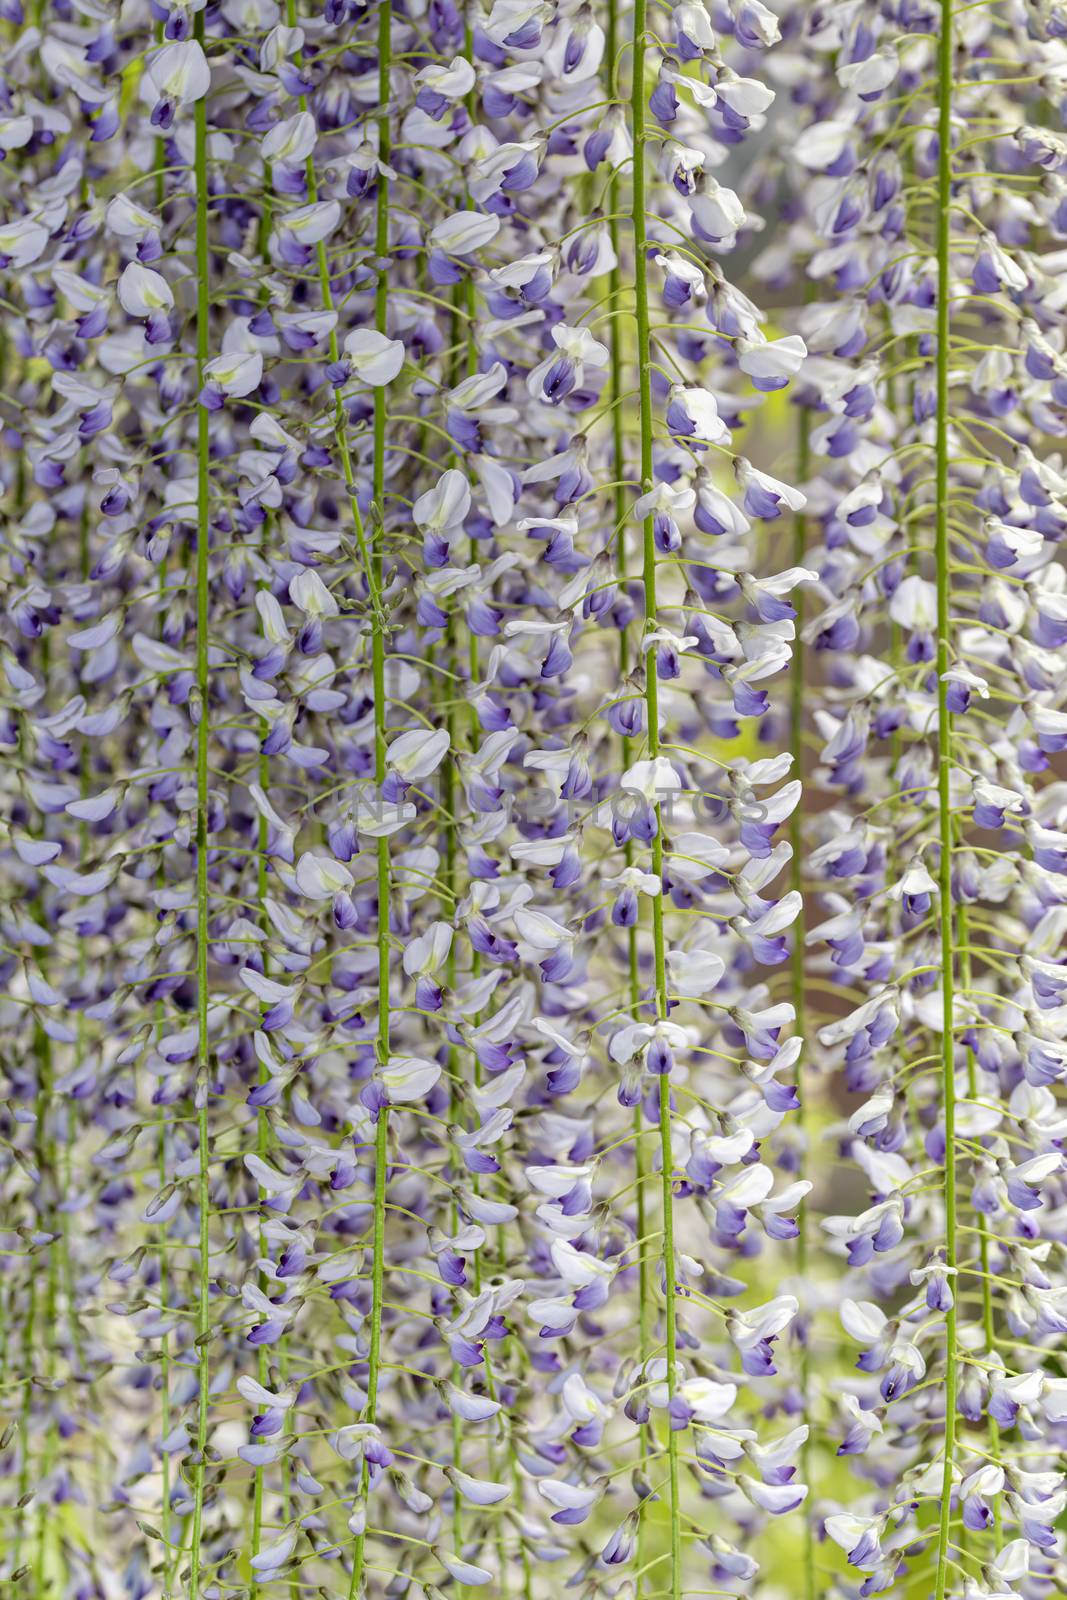 Group of Wisteria flowers forming a fence again a green wall by ankorlight